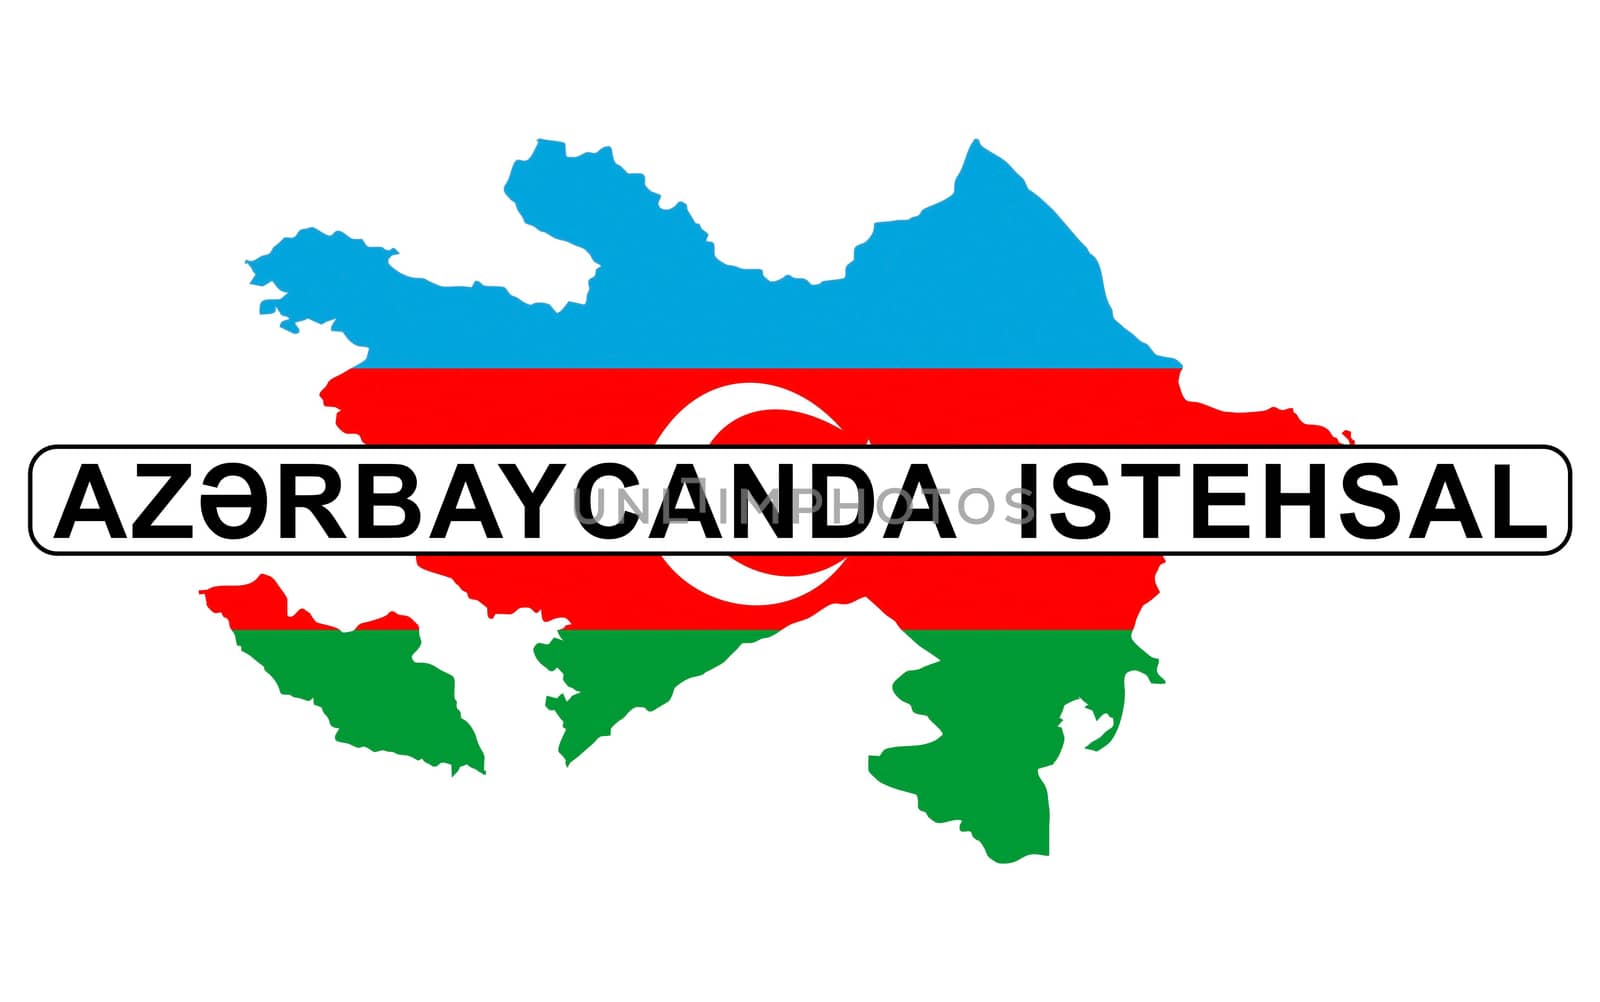 made in azerbaijan country national flag map shape with text